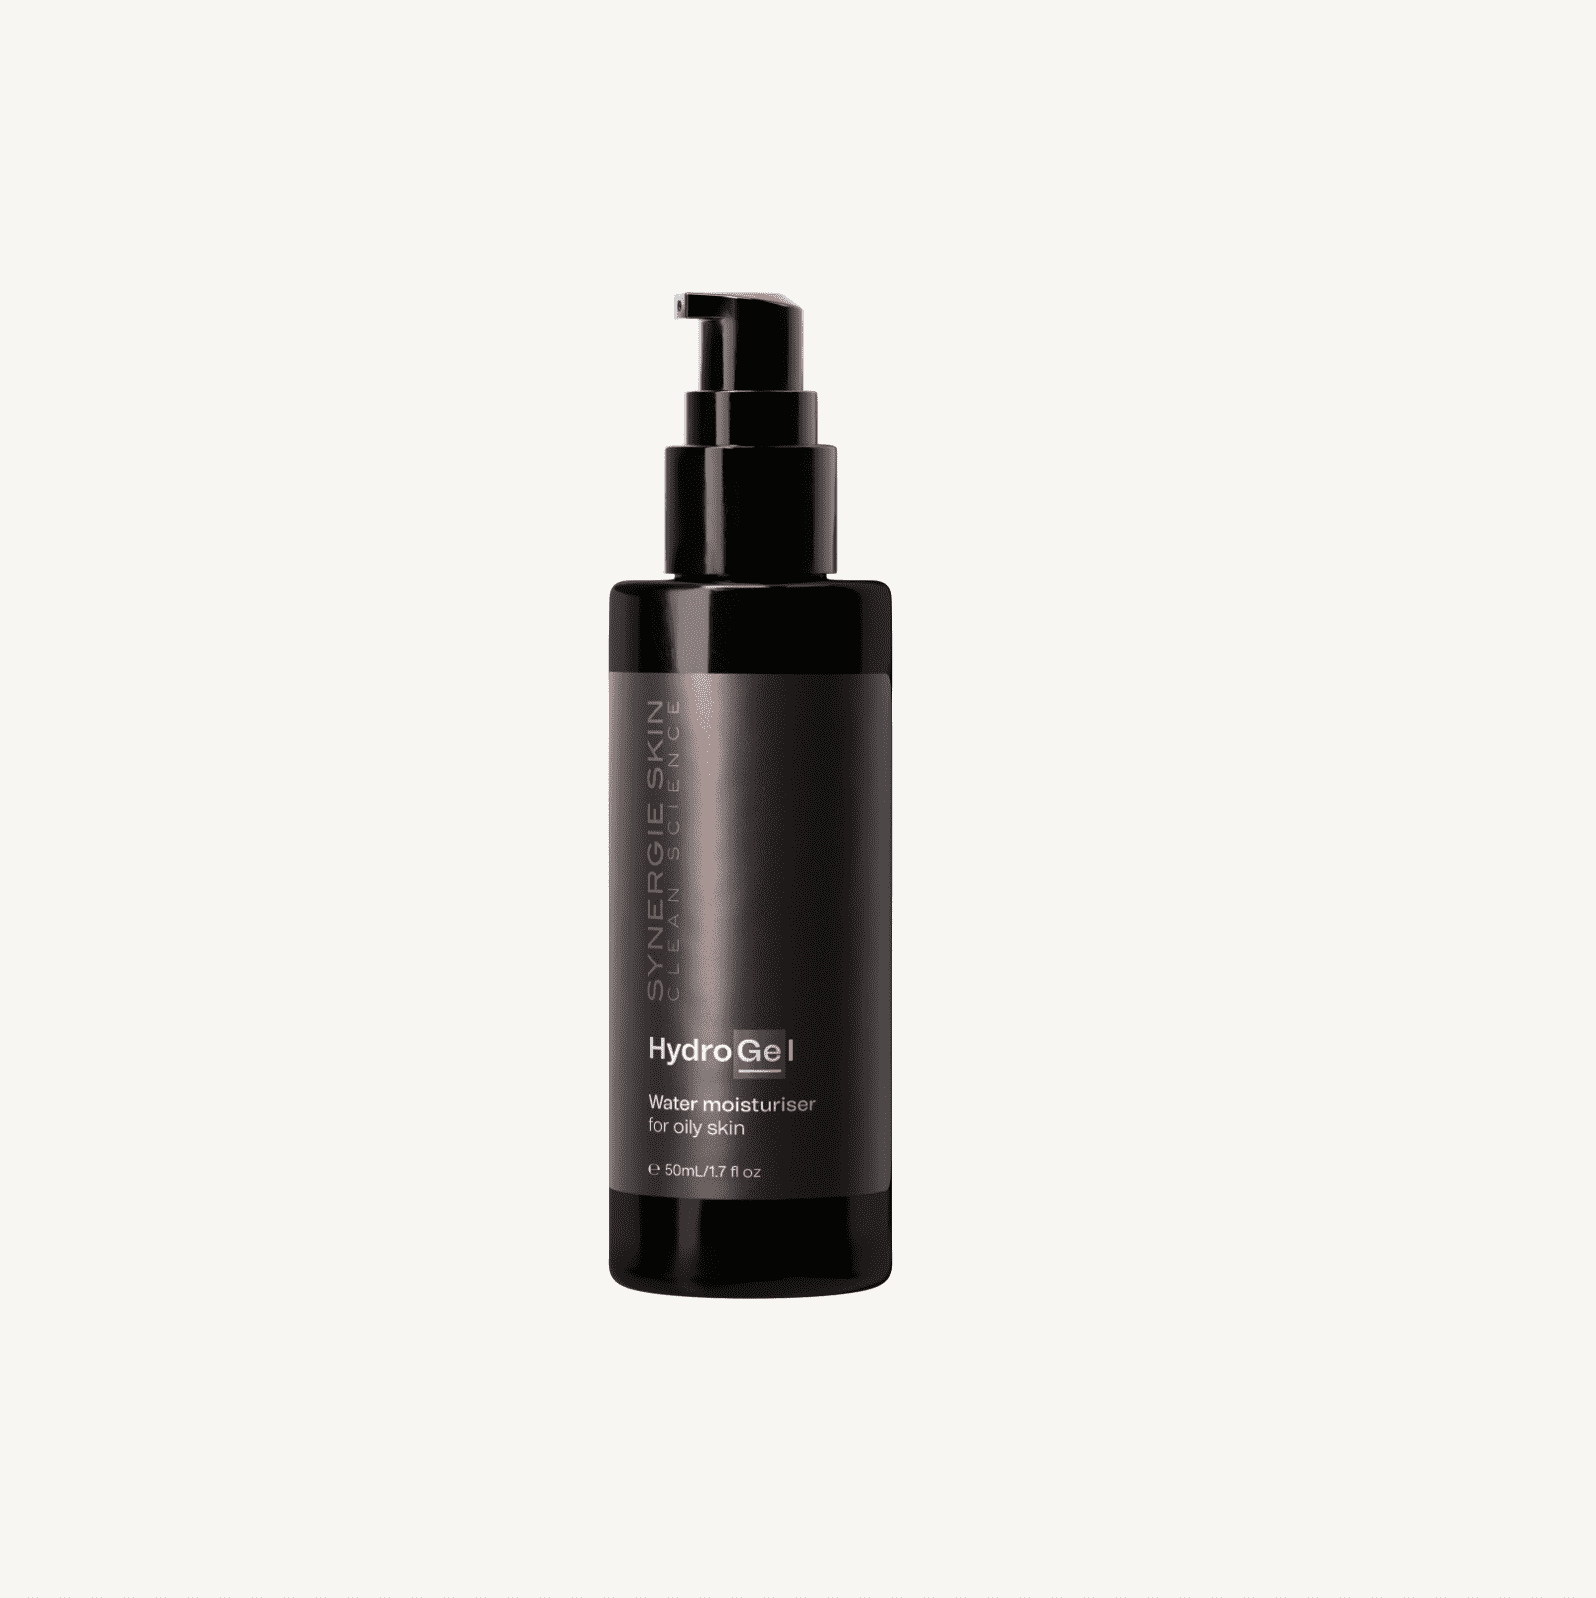 A black bottle with a pump dispenser labeled "synergic skin hydrogel water moisturizer" on a white background. the container has minimalistic design and contains 50 ml of the product.